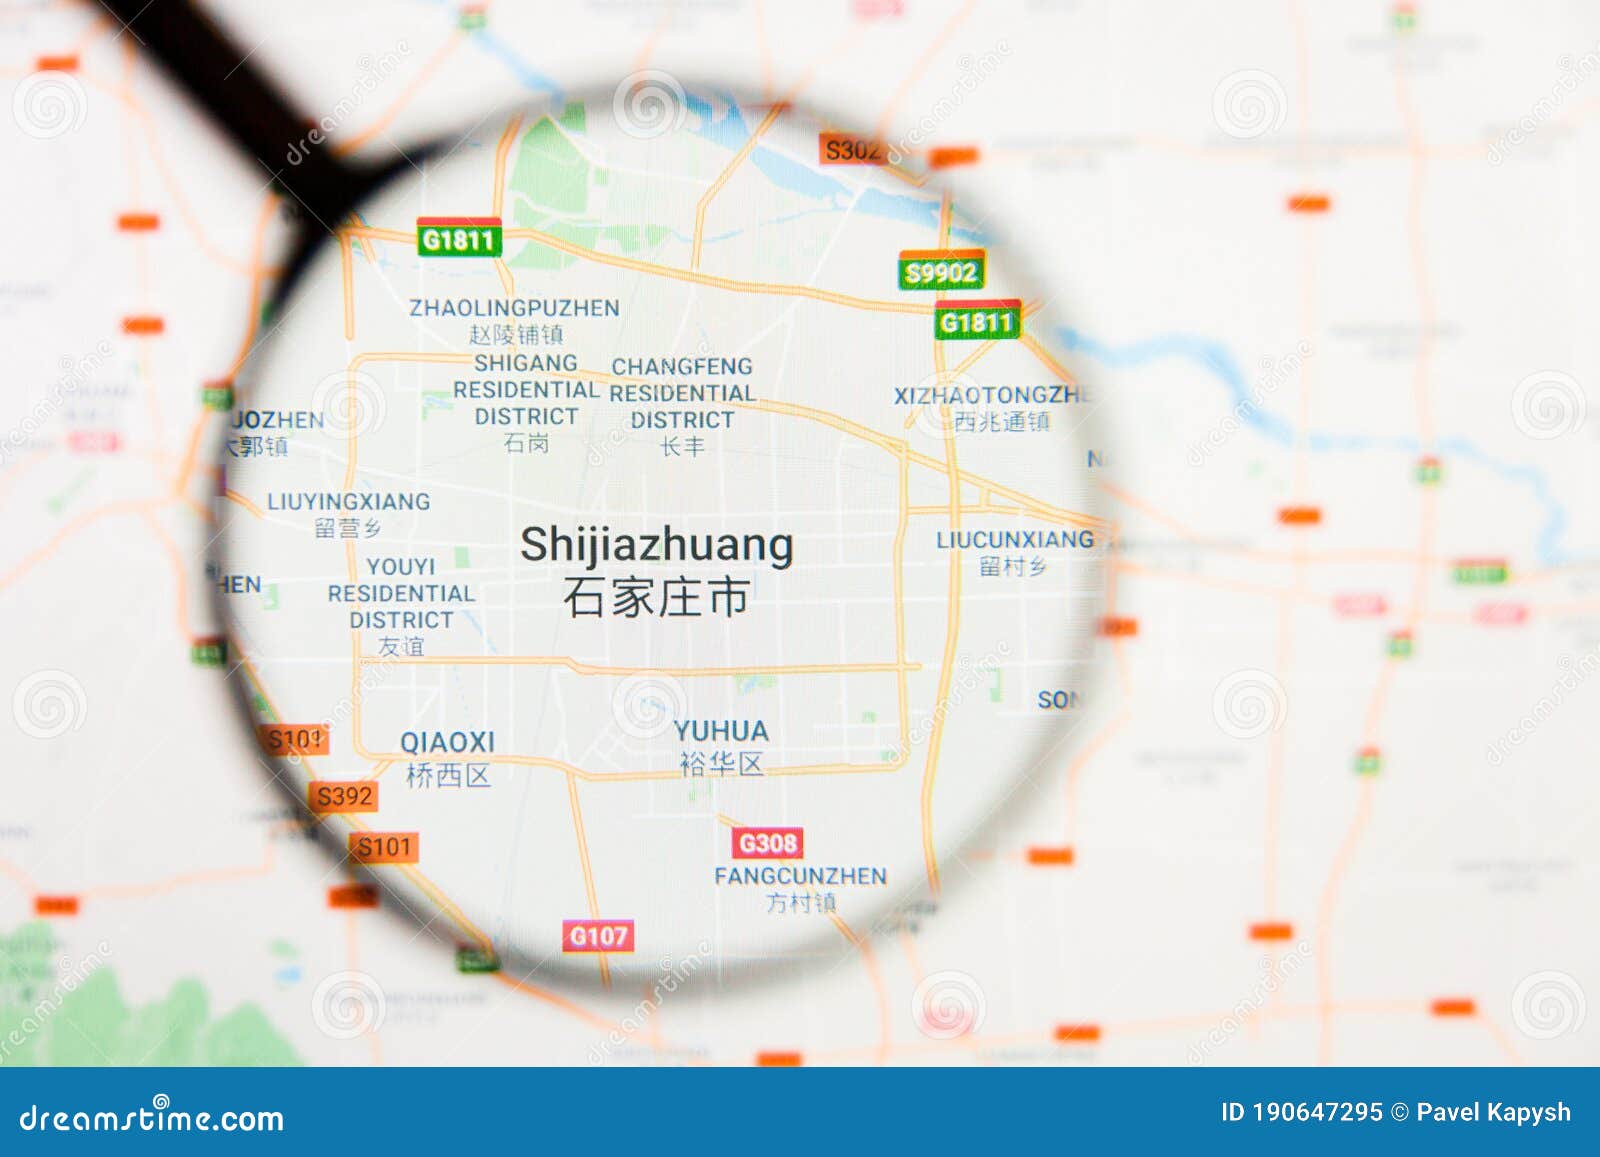 shijiazhuang, china city visualization illustrative concept on display screen through magnifying glass